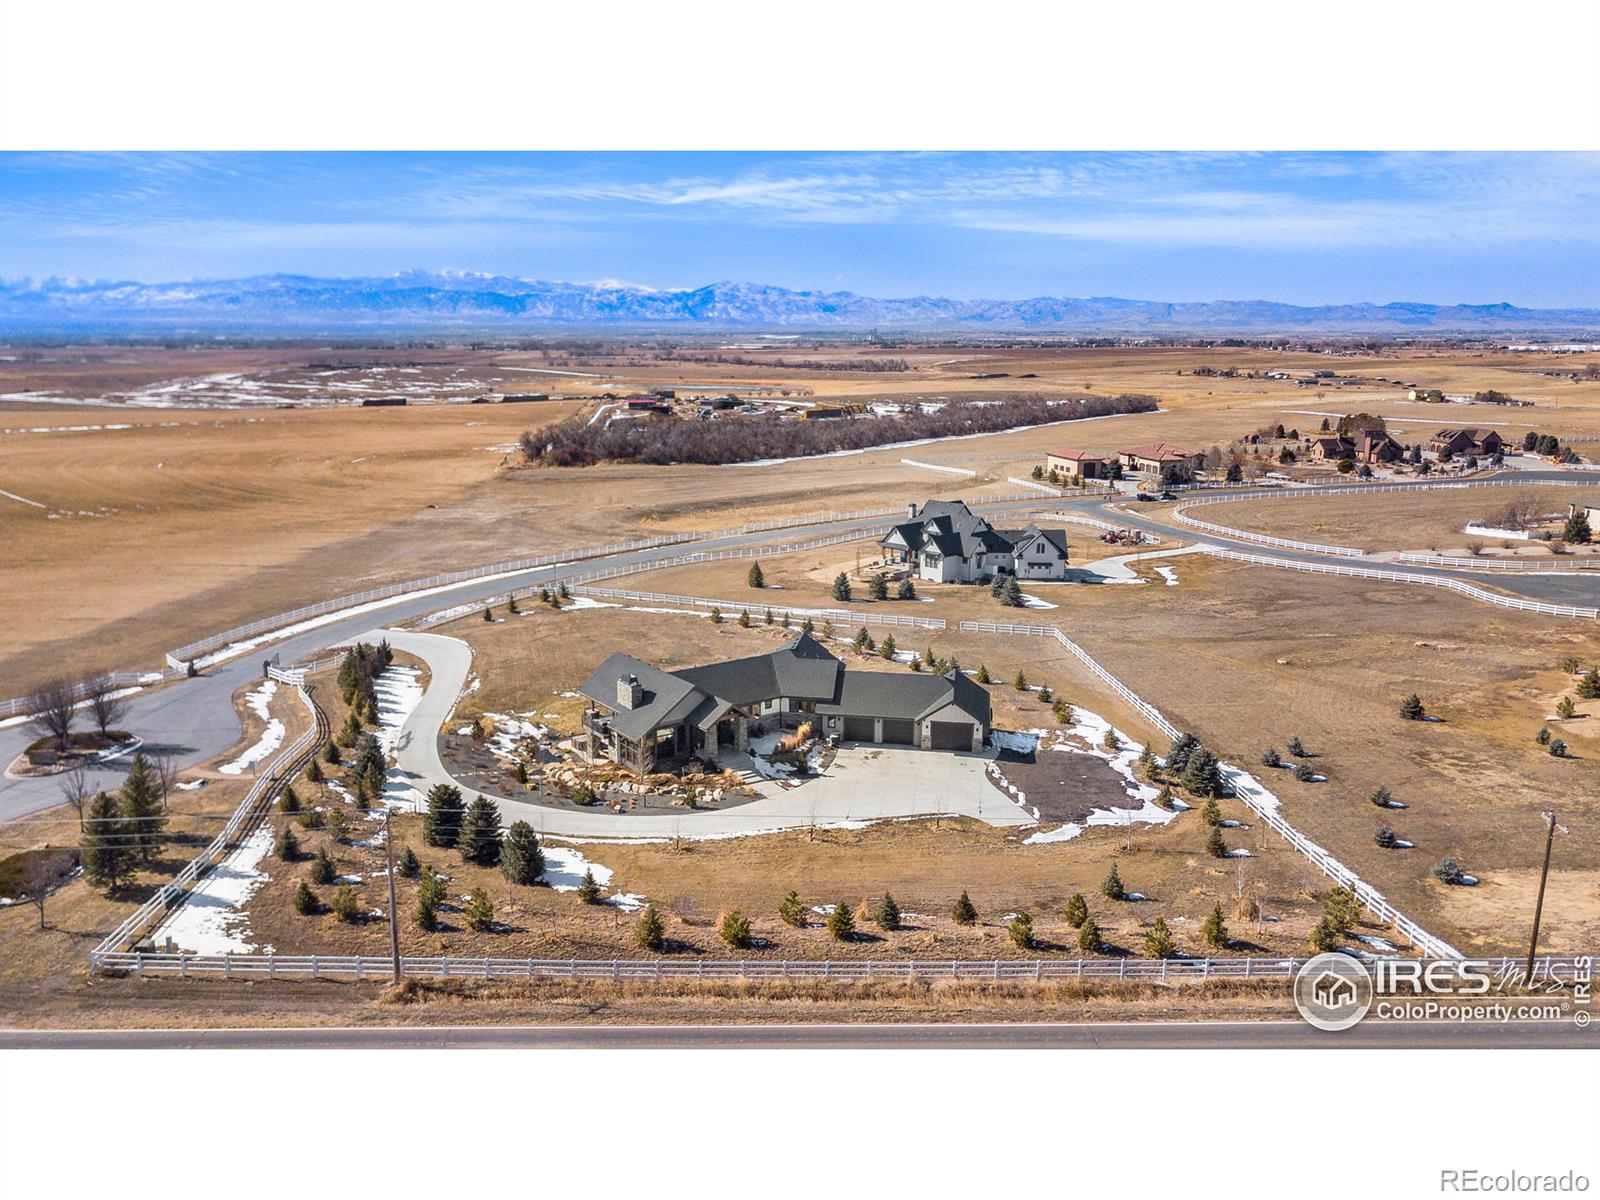 42243 Waterford Hill, Fort Collins, CO